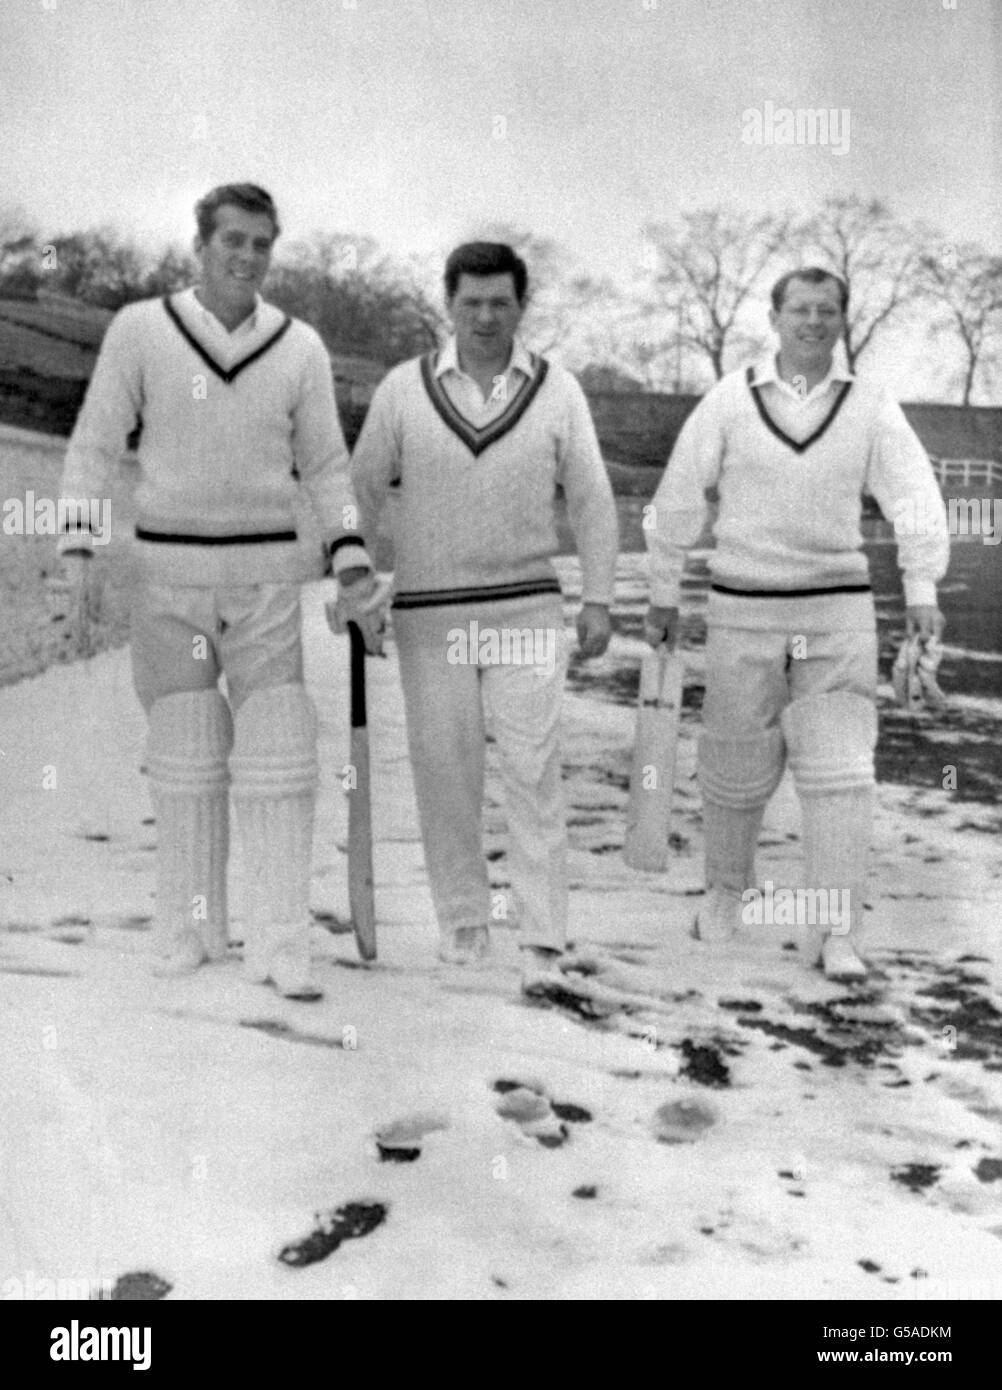 A few weeks ago, Yorkshire cricketer Geoff Boycott (right) was batting in the sunshine of Australia. Today he plods through the snow with team mates Jimmy Binks (centre) and Don Wilson for Yorkshire's first practice at Bradford Park Avenue Ground in preparation for the forthcoming season. Stock Photo